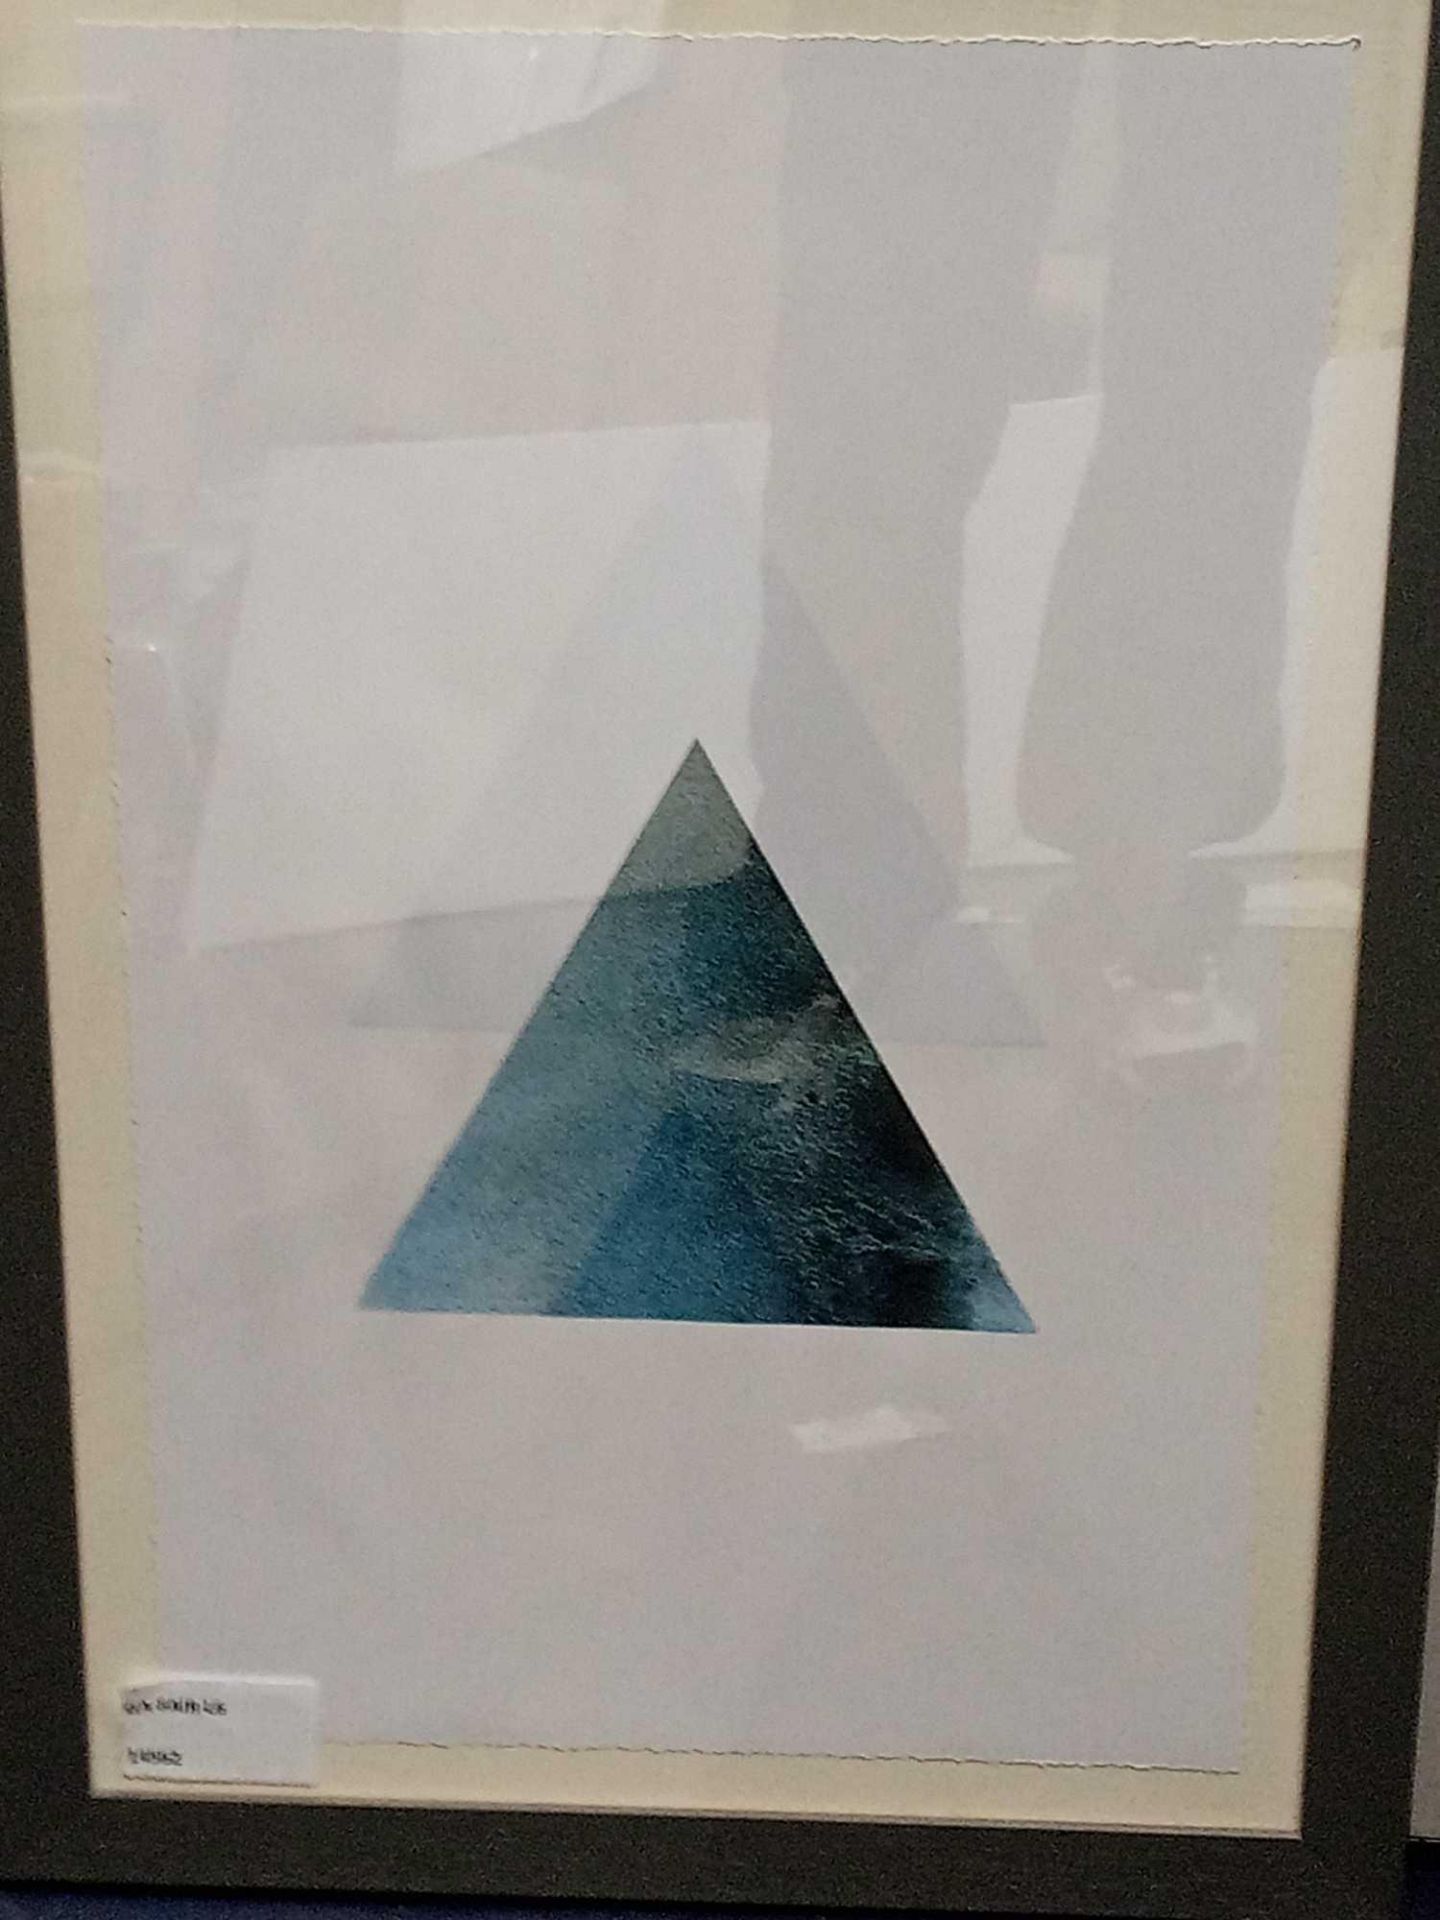 The Two Abstract Triangles Framed Print Rrp £45 (14562)(Appraisals Are Available Upon Request) (